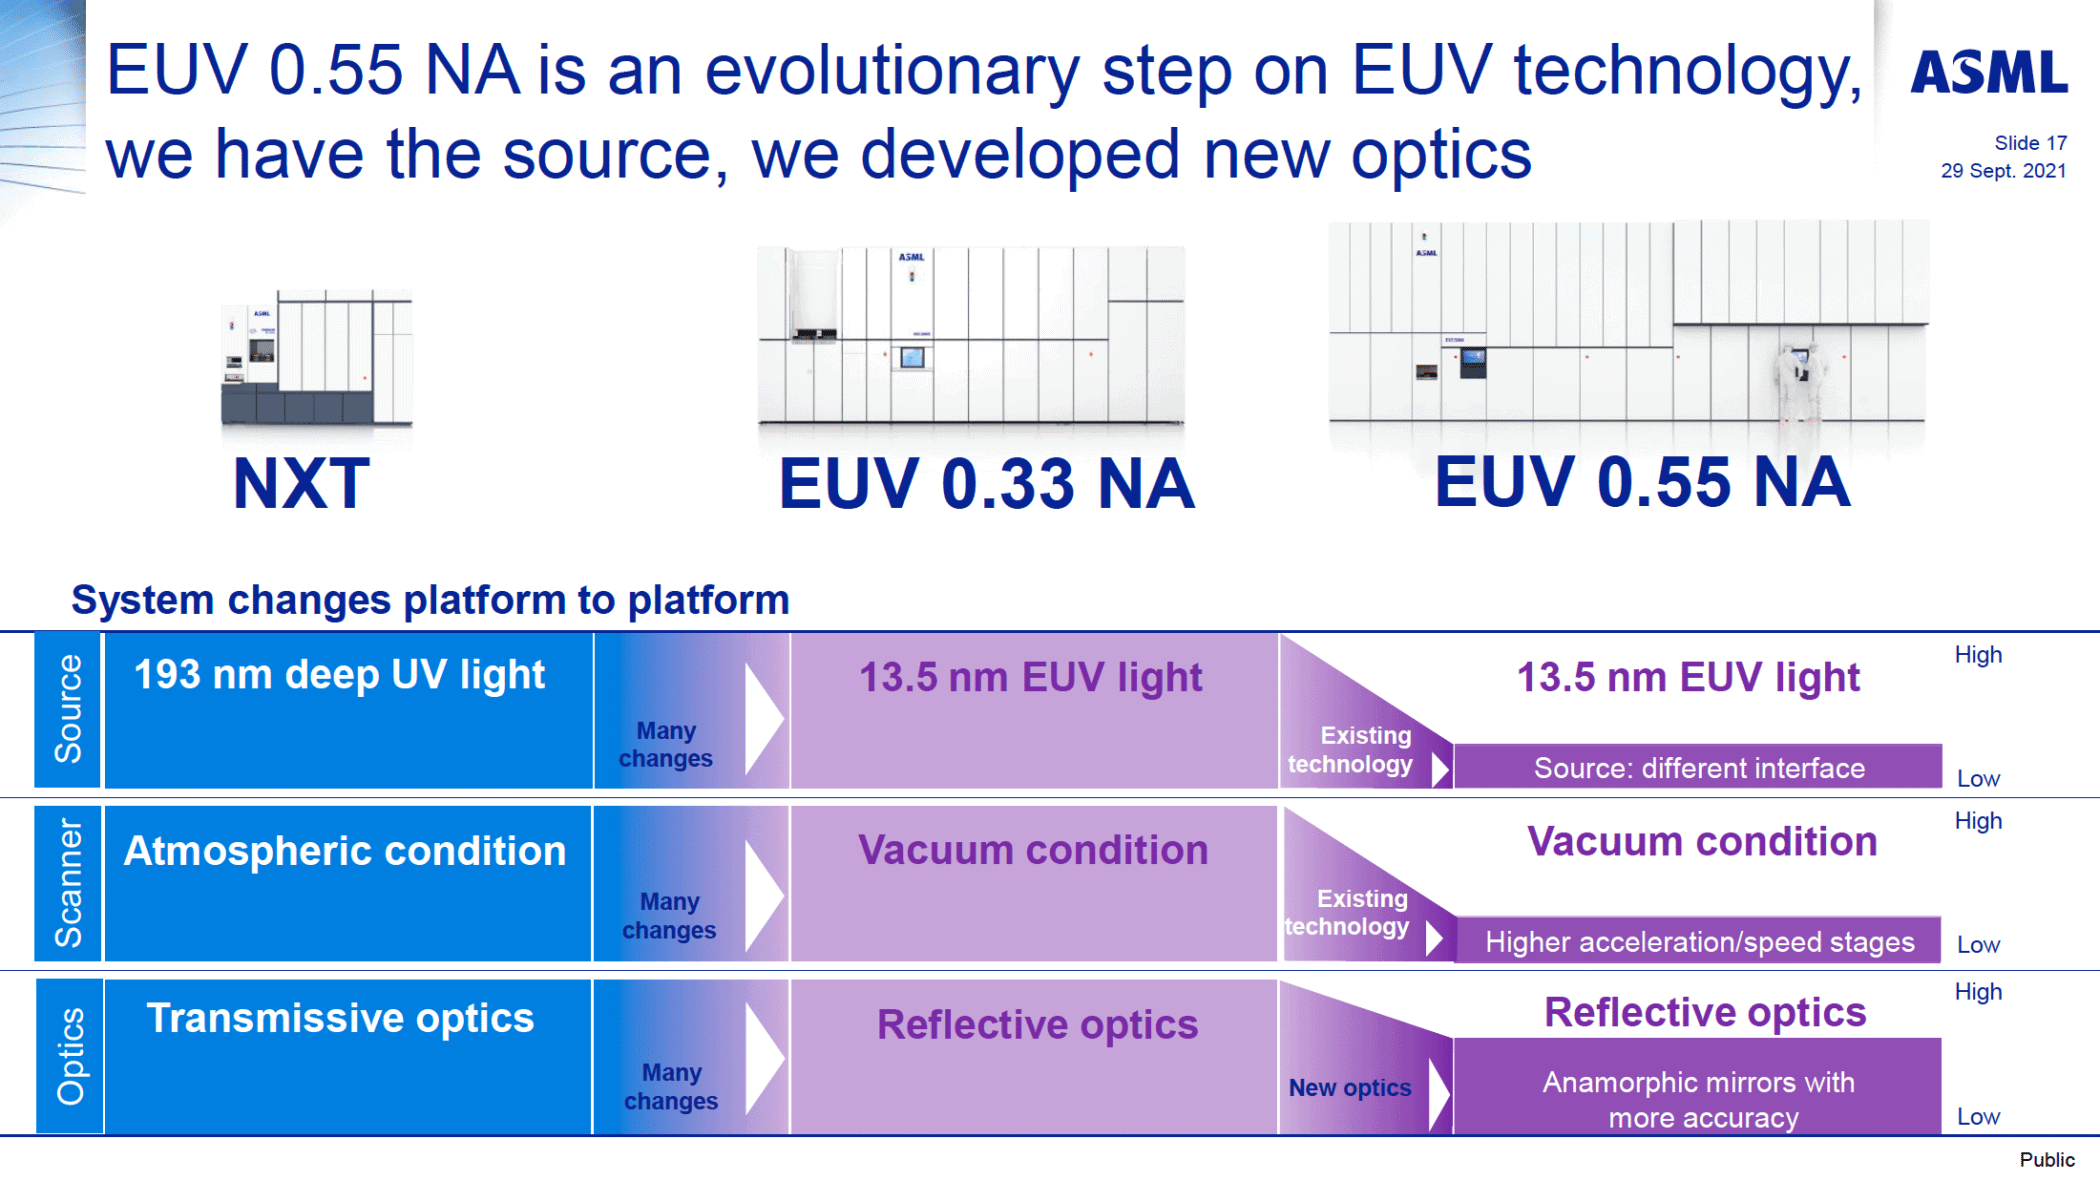 euv 055 na is an evolutionary step on euv technology